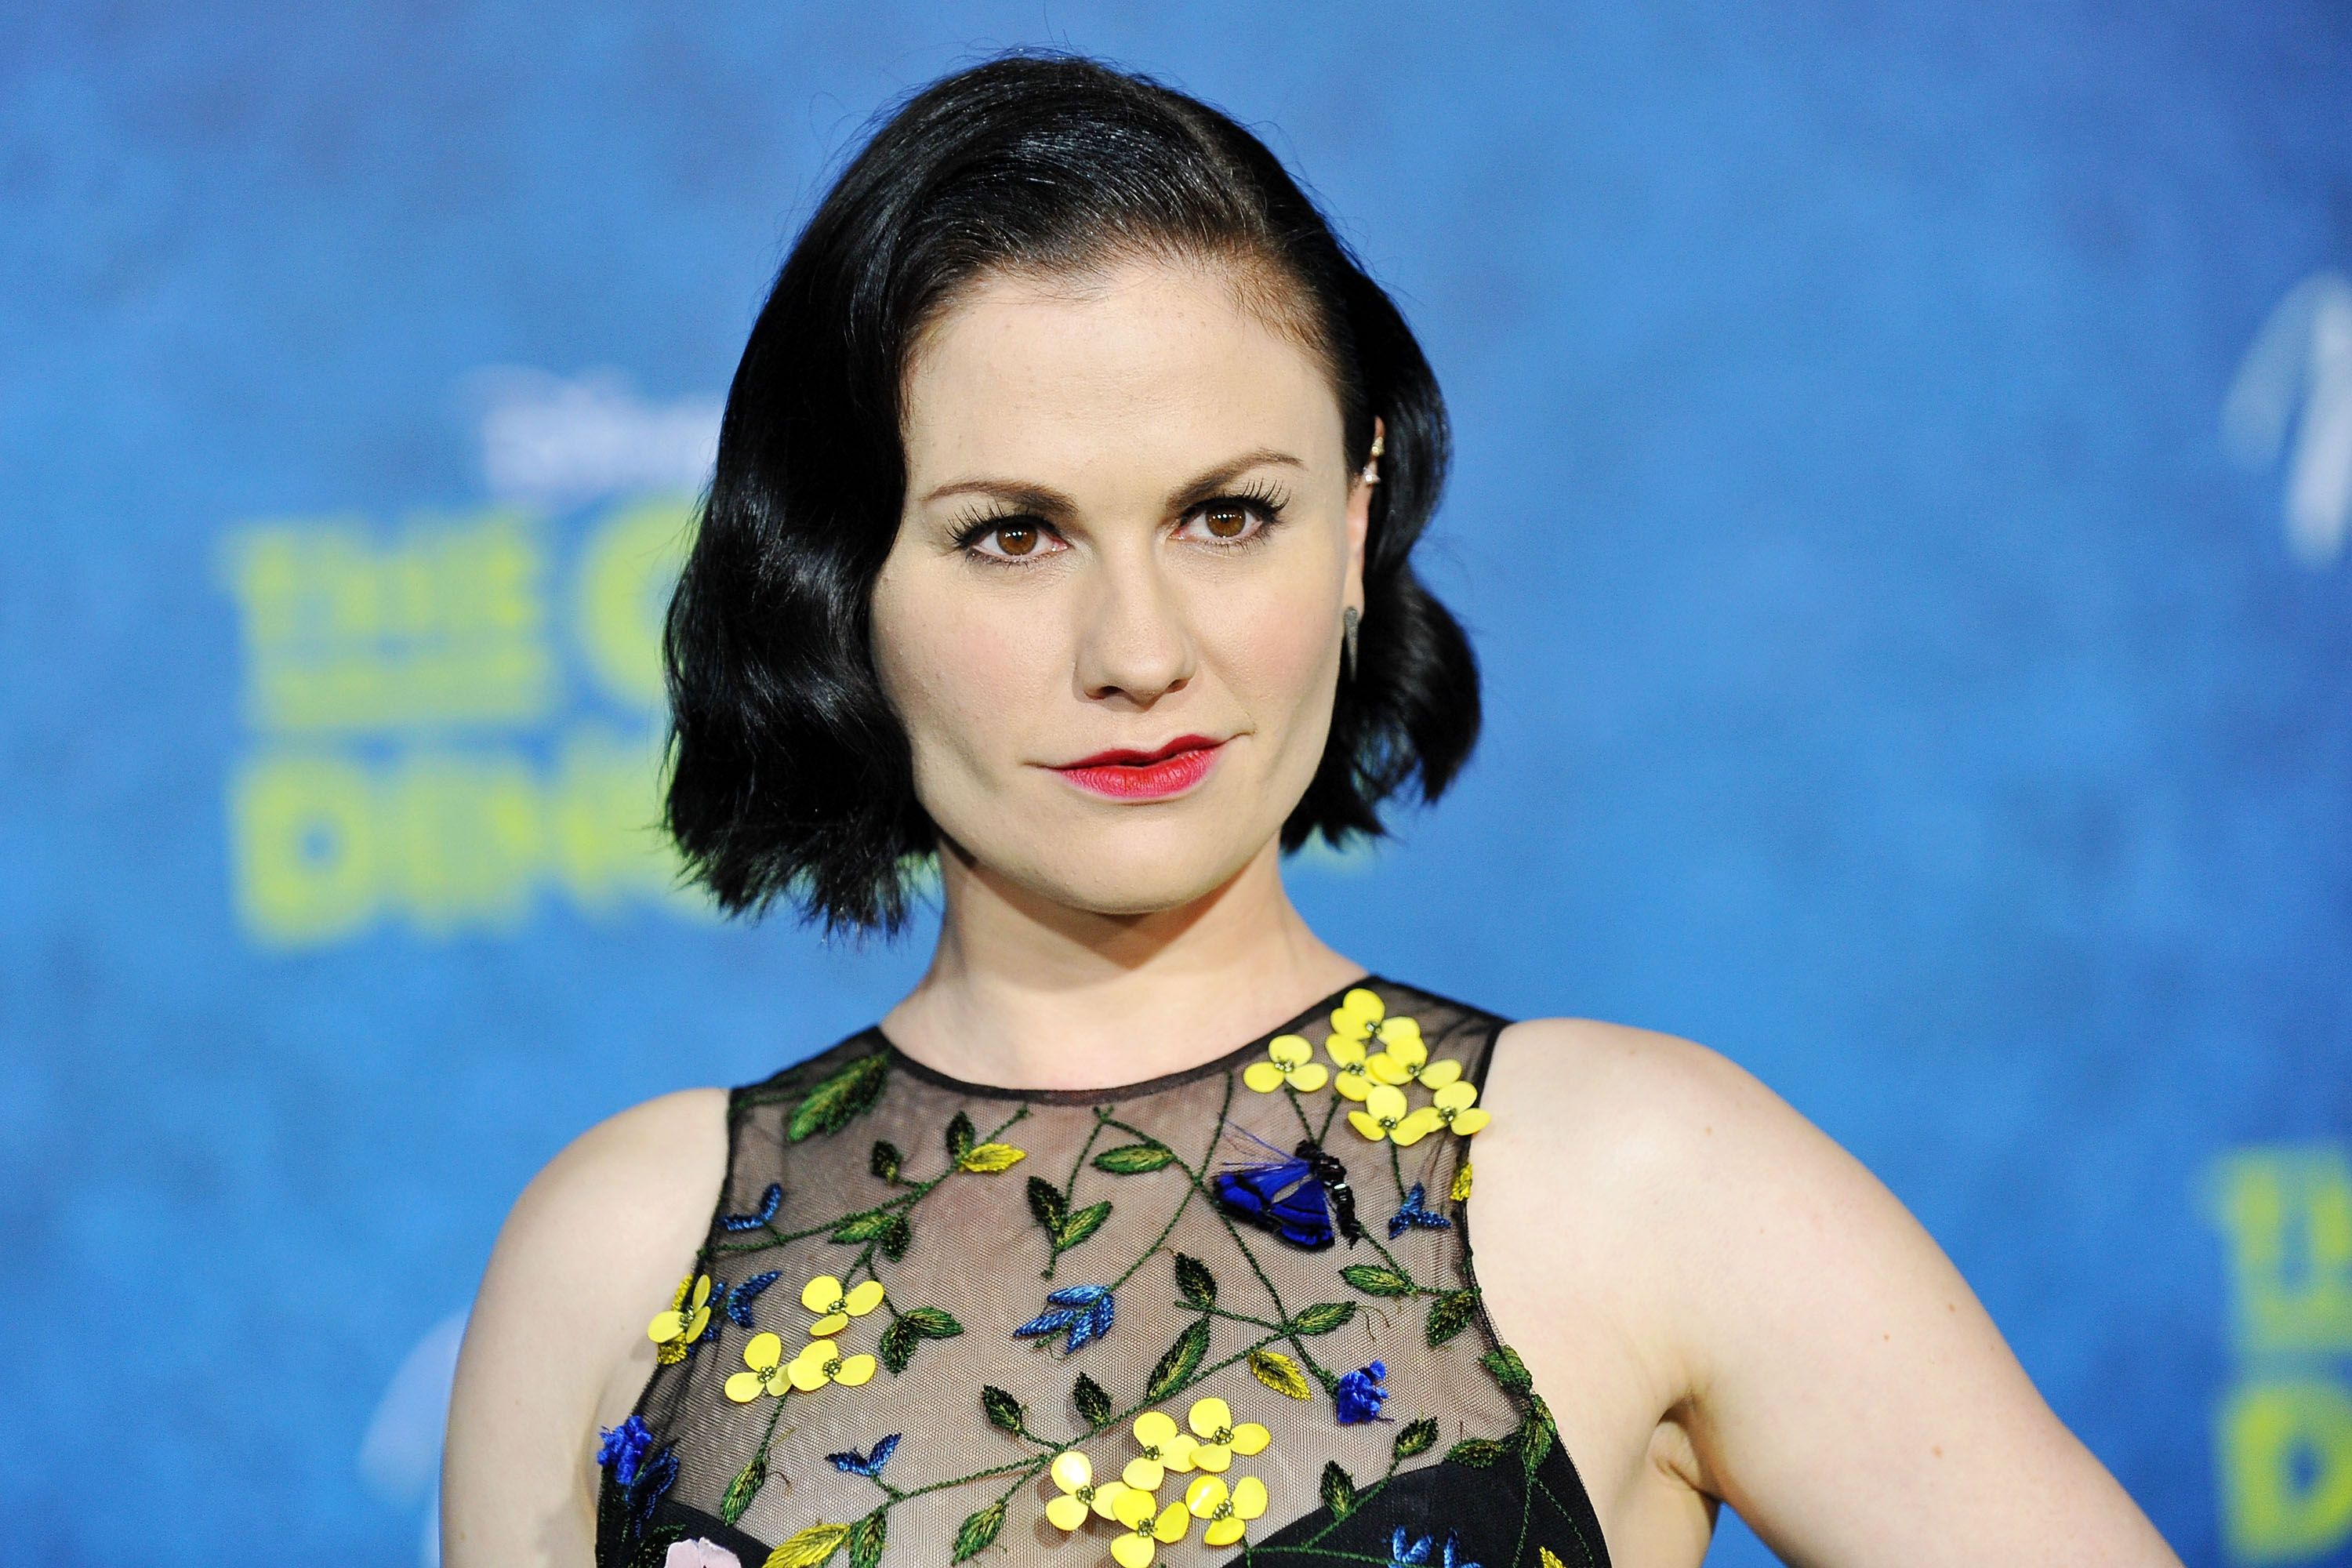 Anna Paquin had a fantastic response to people who criticised her appearance